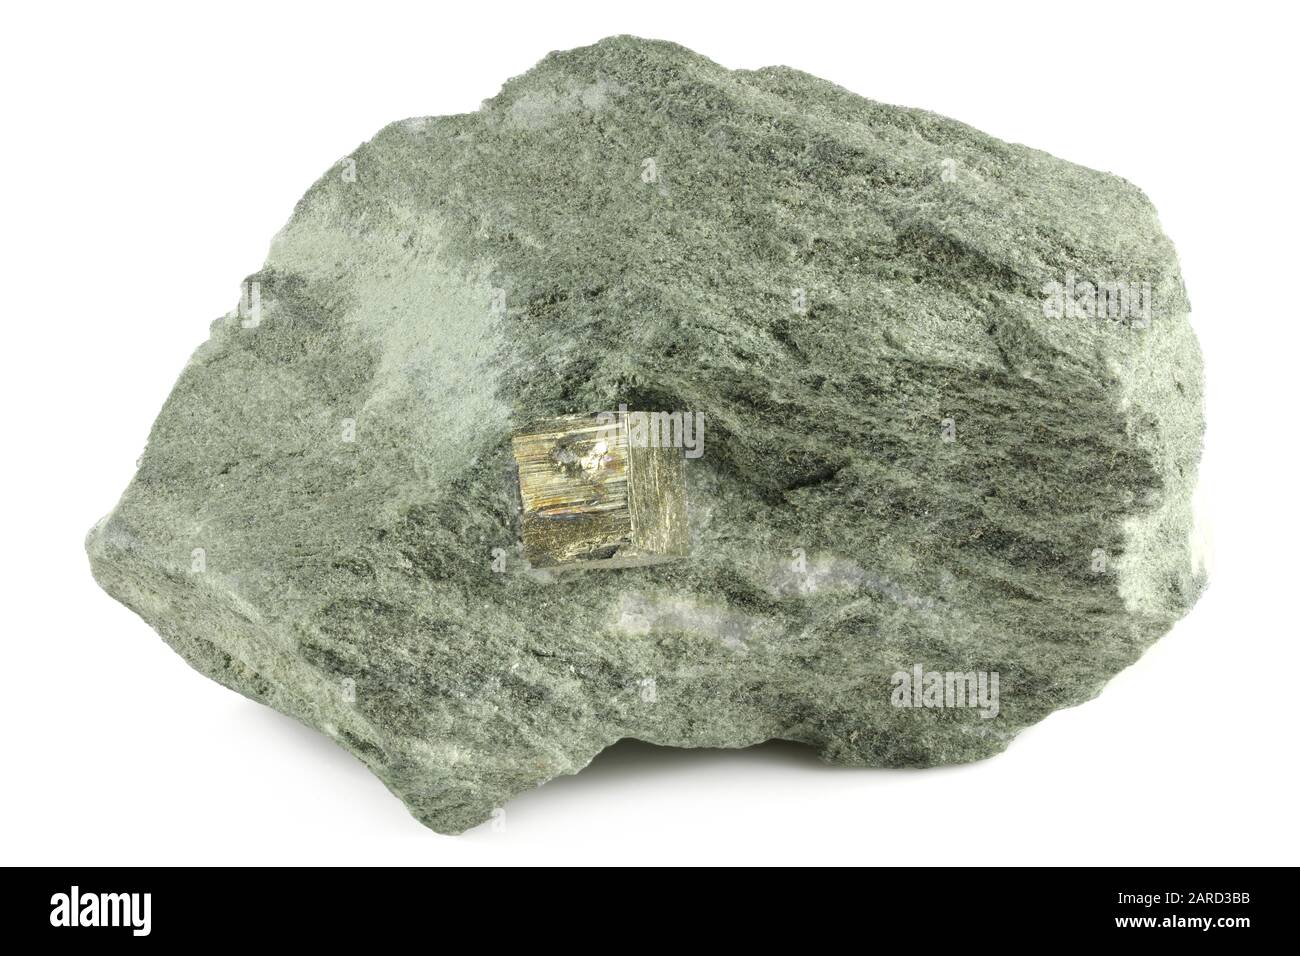 pyrite cubic crystal on bedrock from Rechnitz, Austria isolated on white background Stock Photo